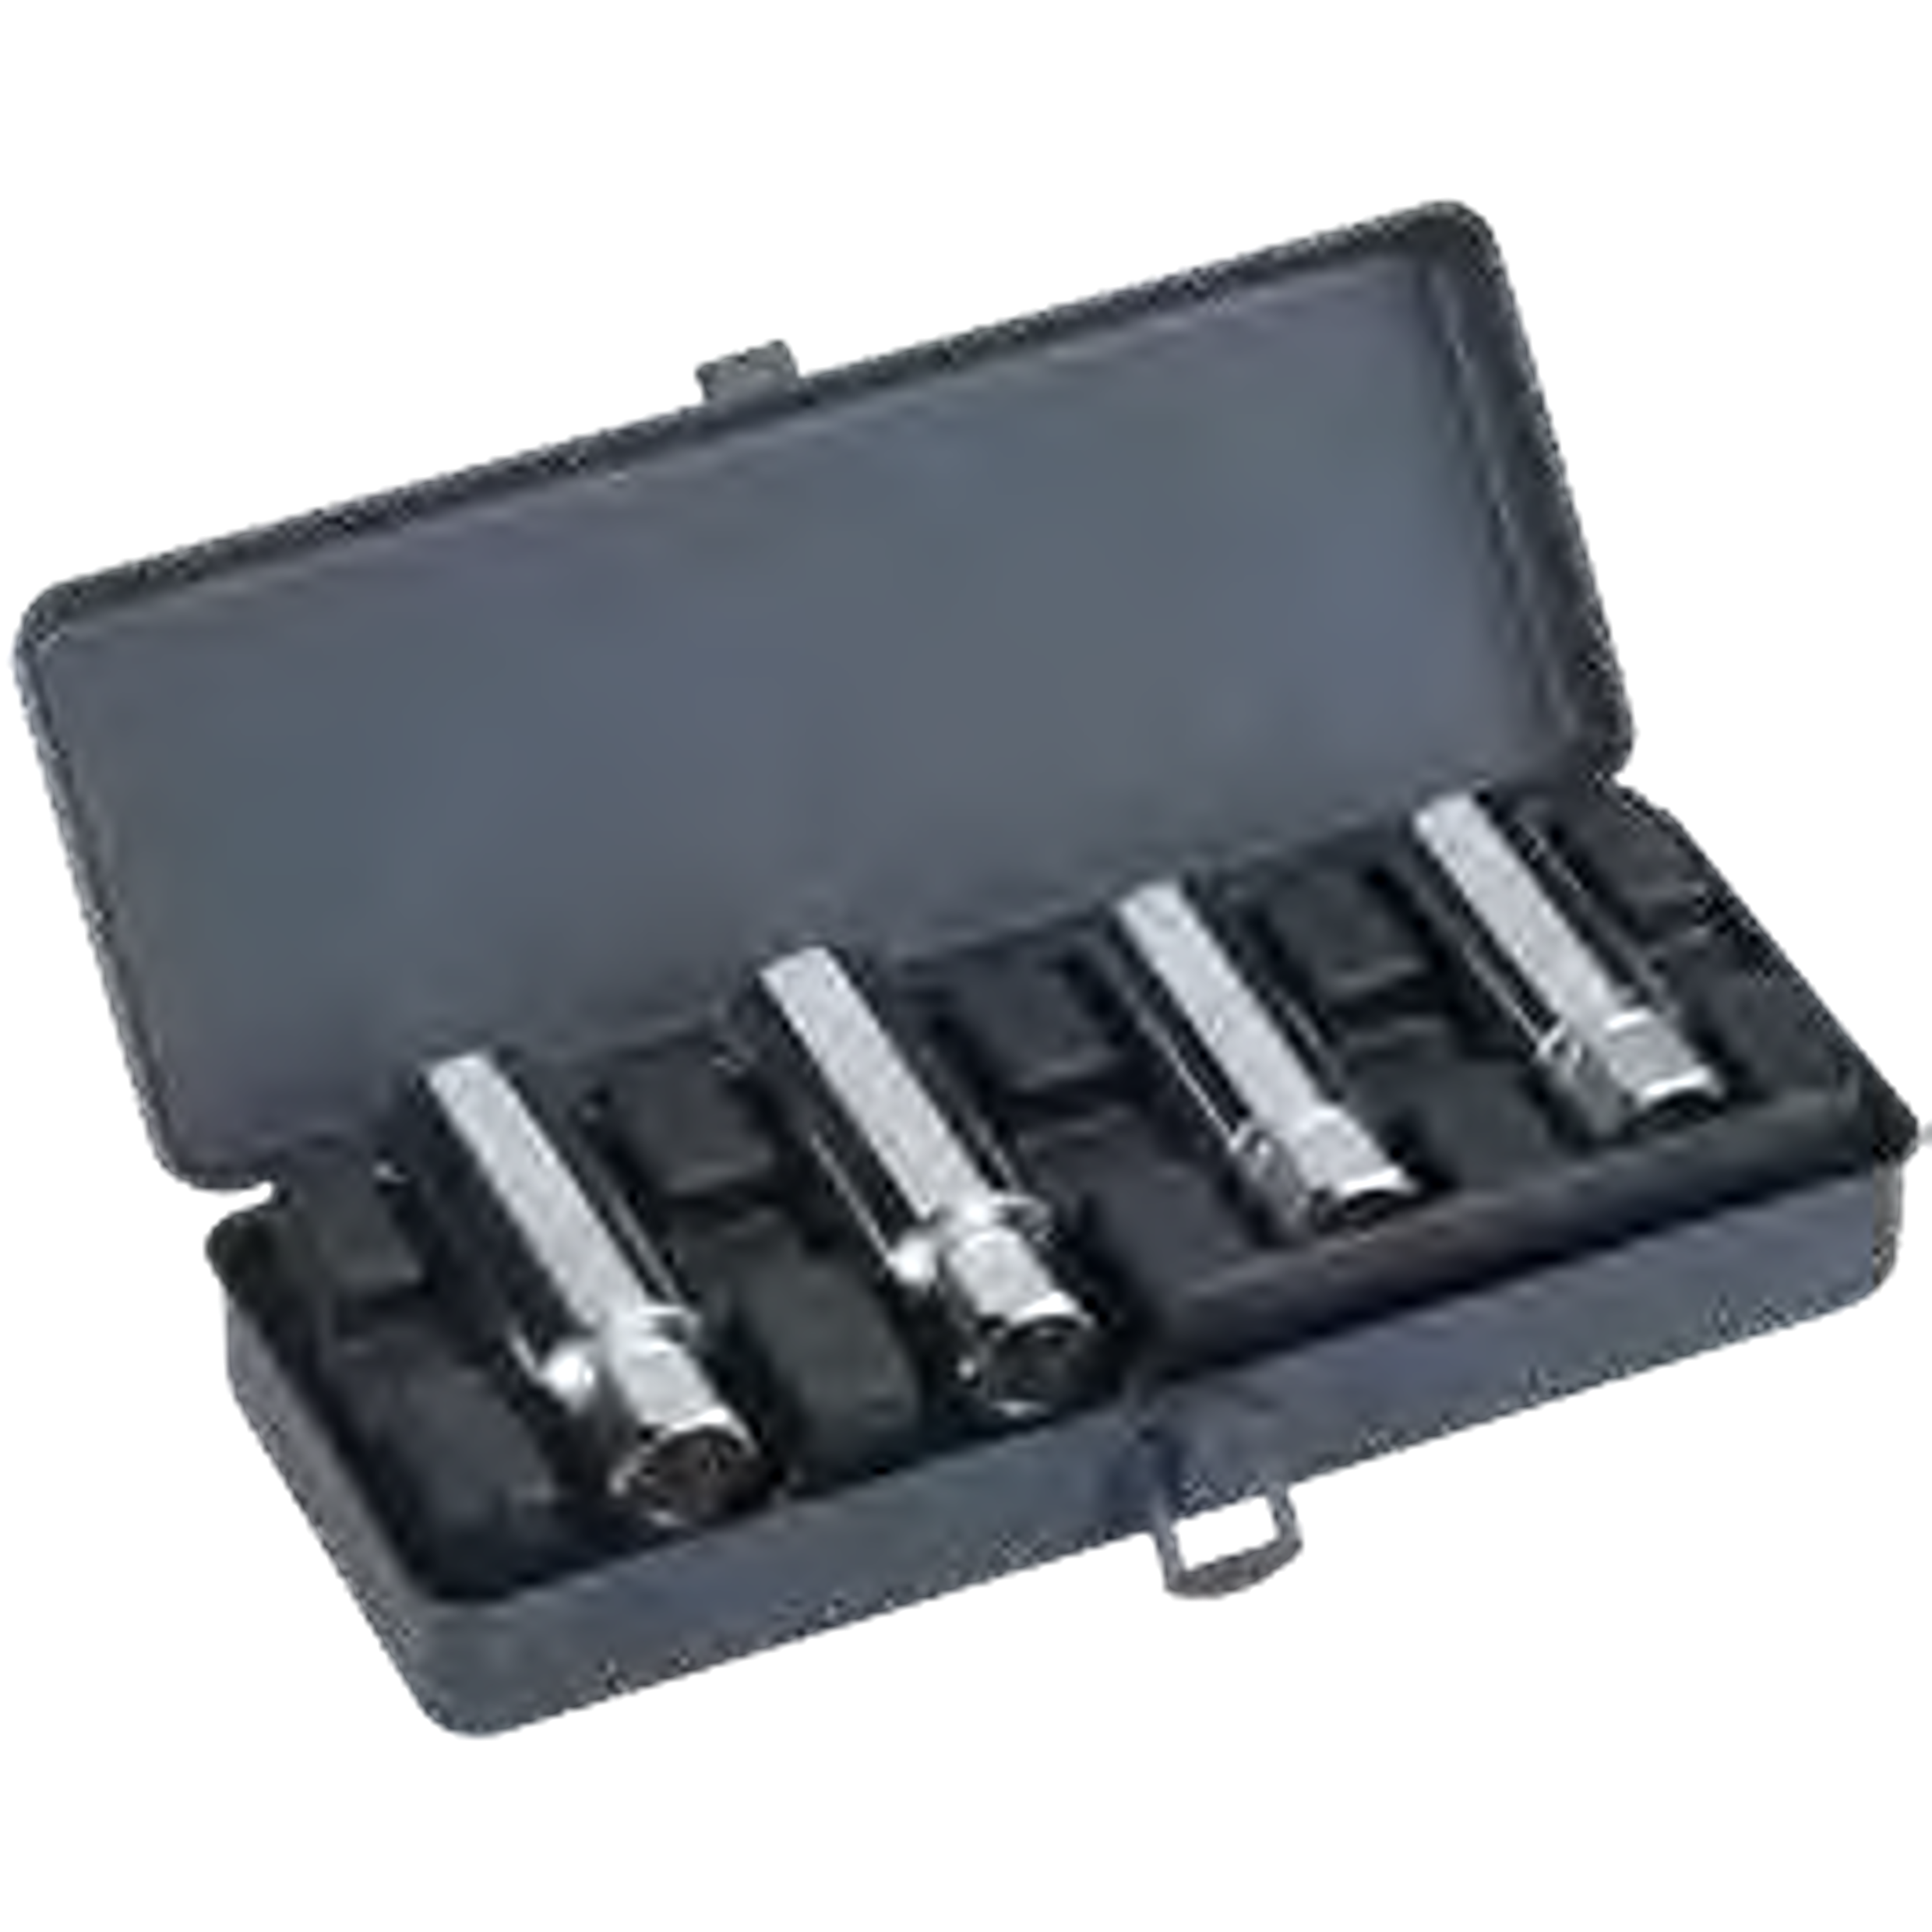 NEXUS 303 Spare Parts - Premium Mechanical Pullers from NEXUS - Shop now at Yew Aik.